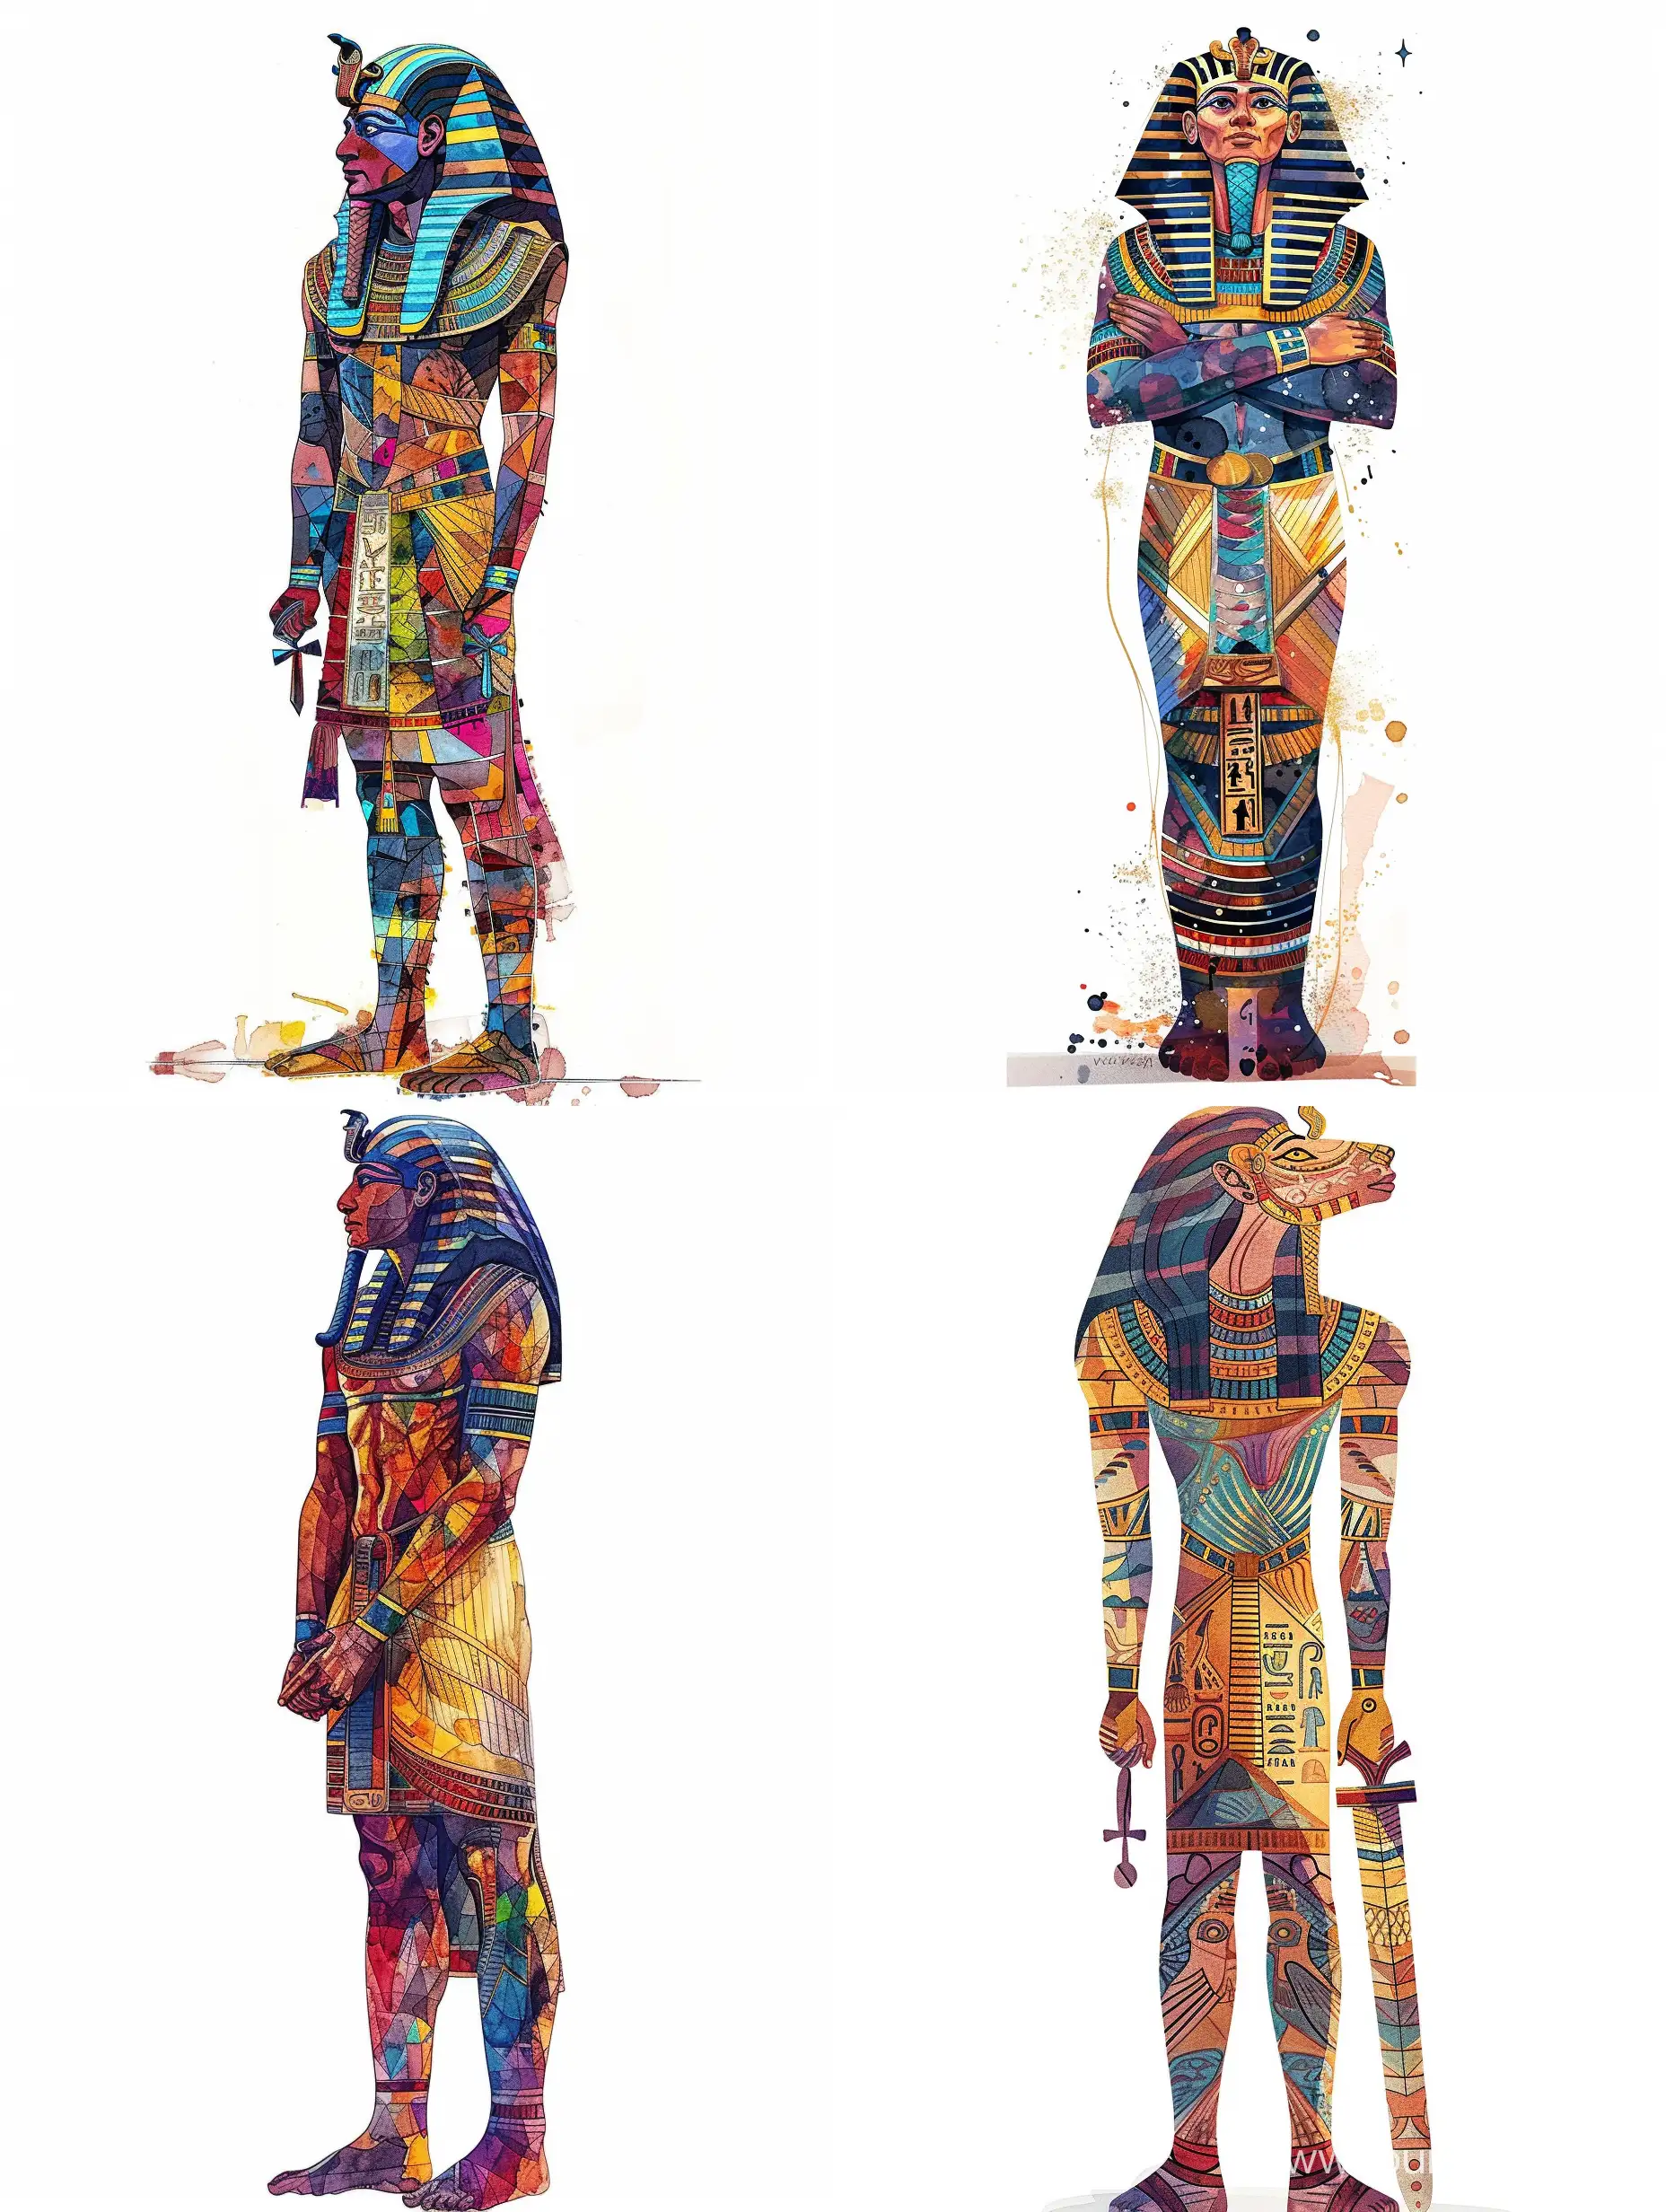 Stylized-Caricature-of-an-Ancient-Egyptian-Warrior-in-Vibrant-Watercolor